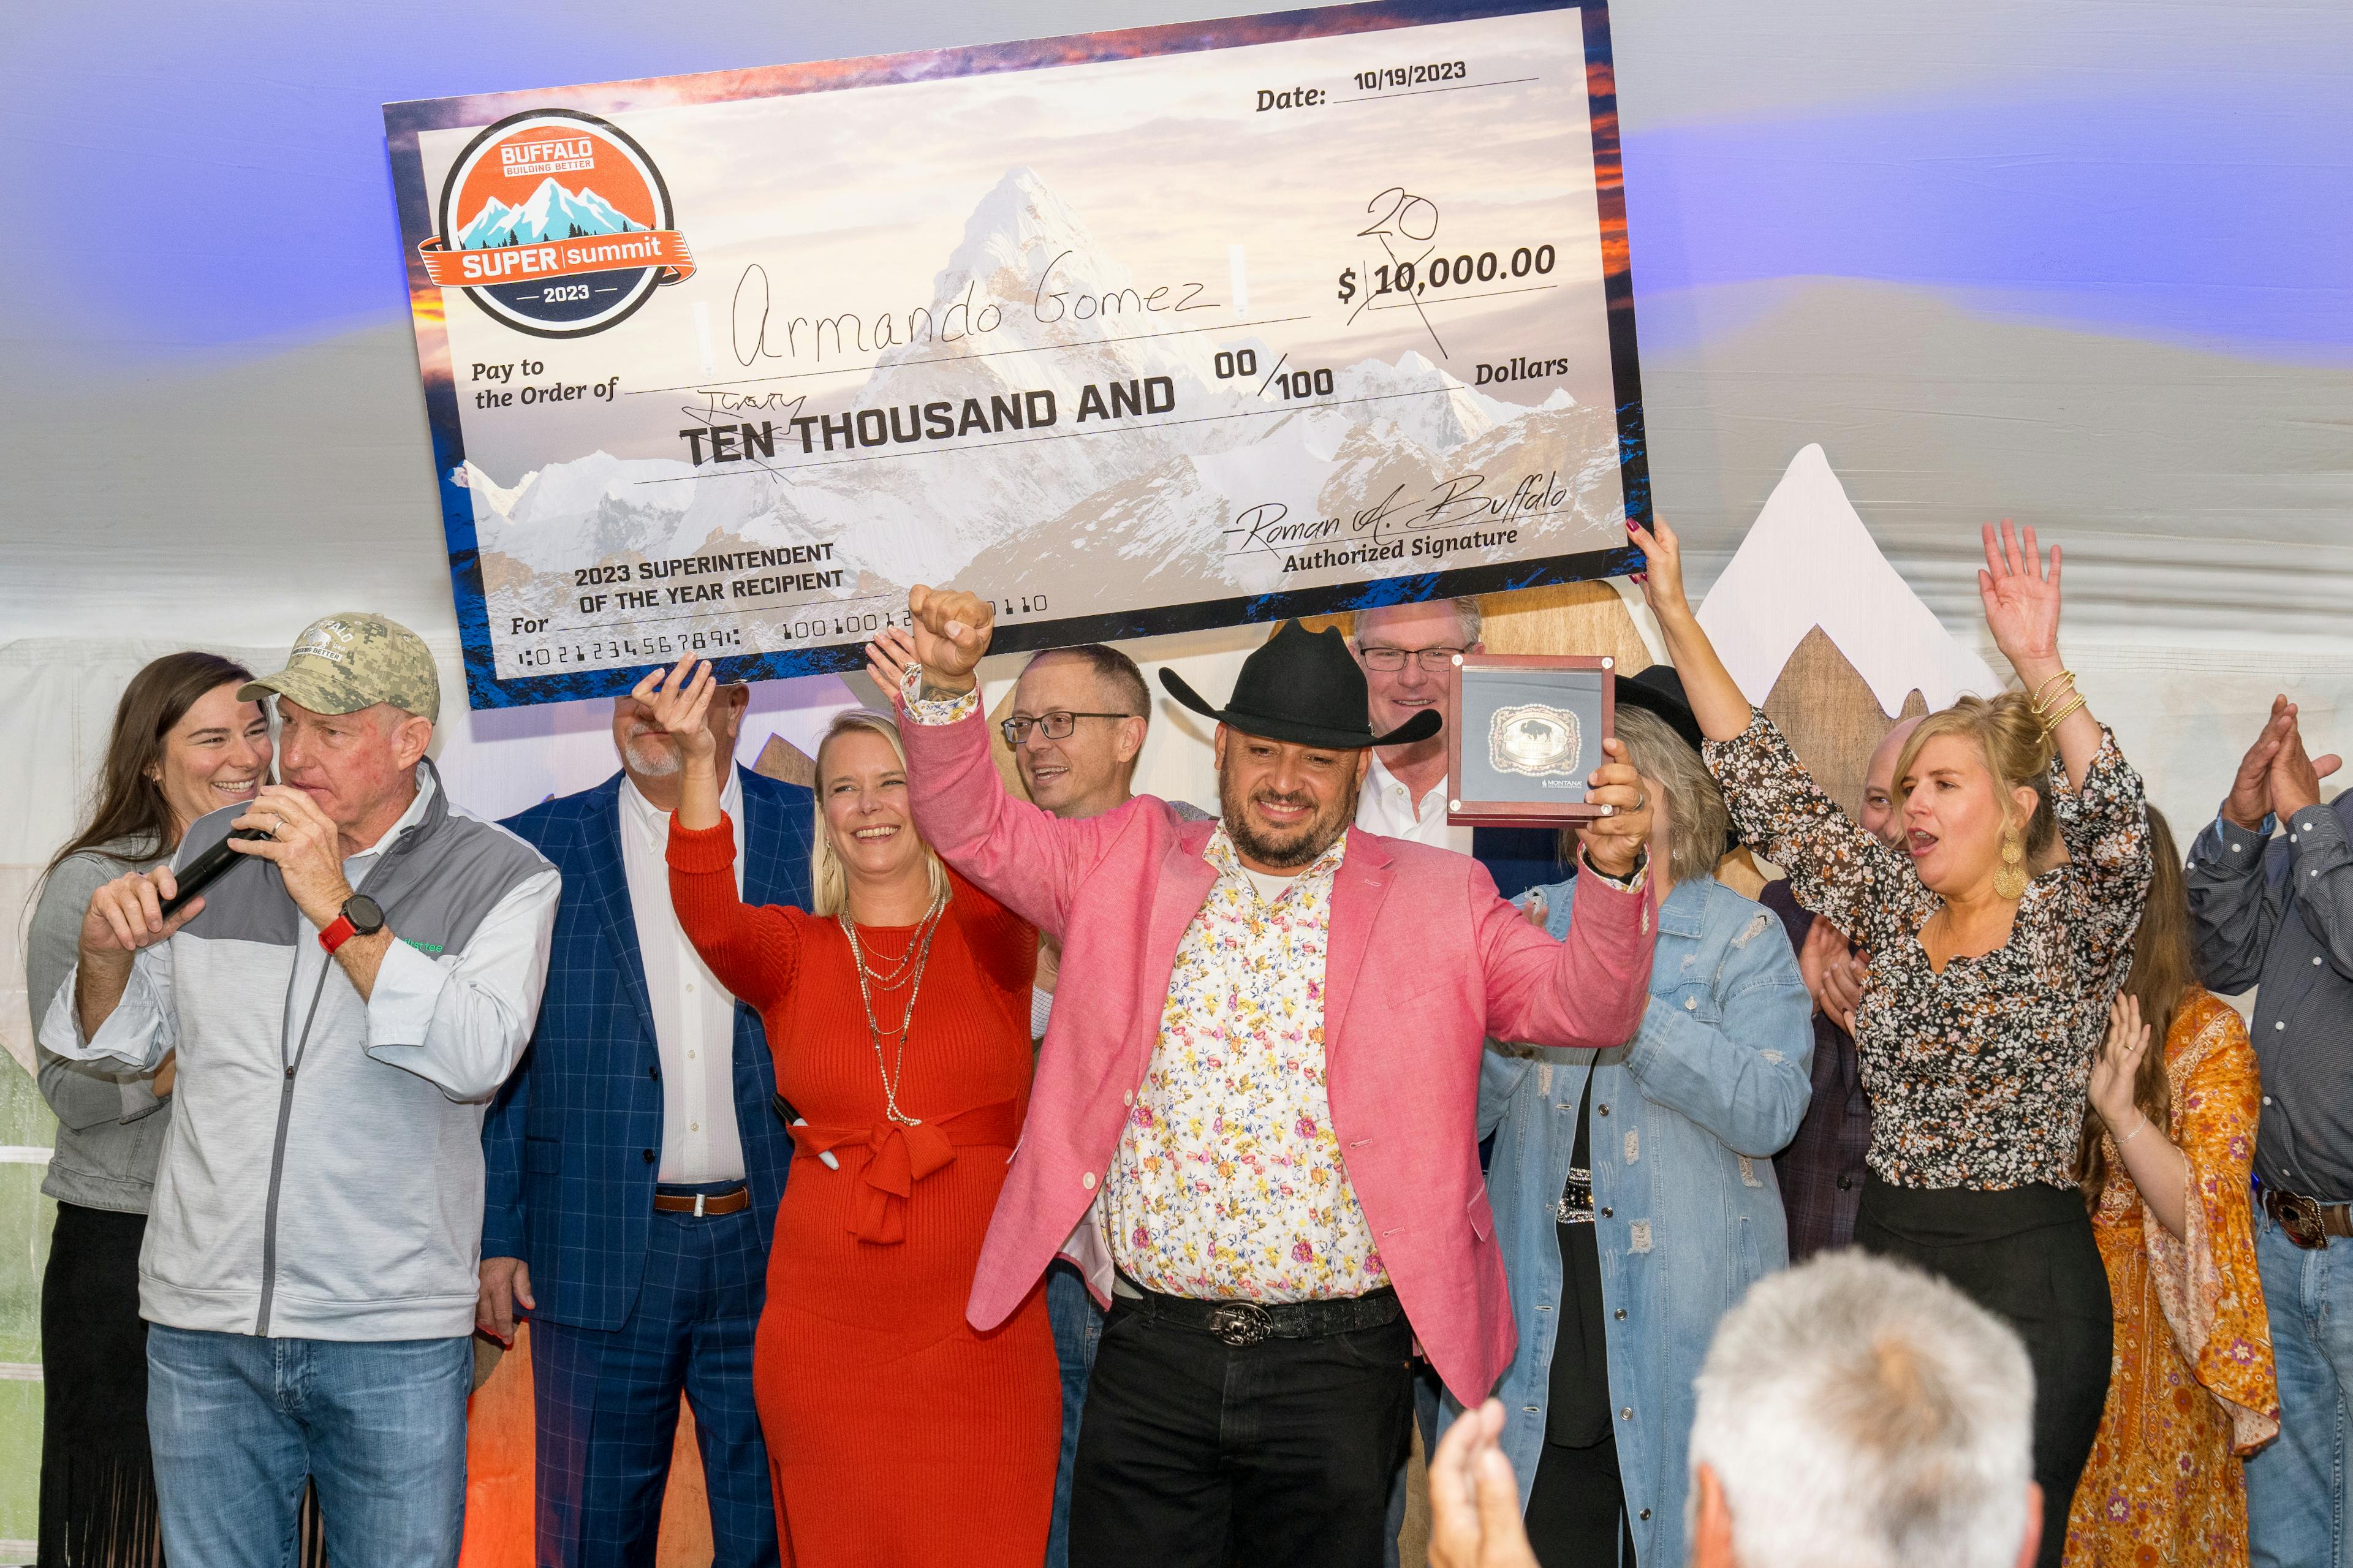 A trophy and oversized check prize being awarded at the 2023 Super Summit